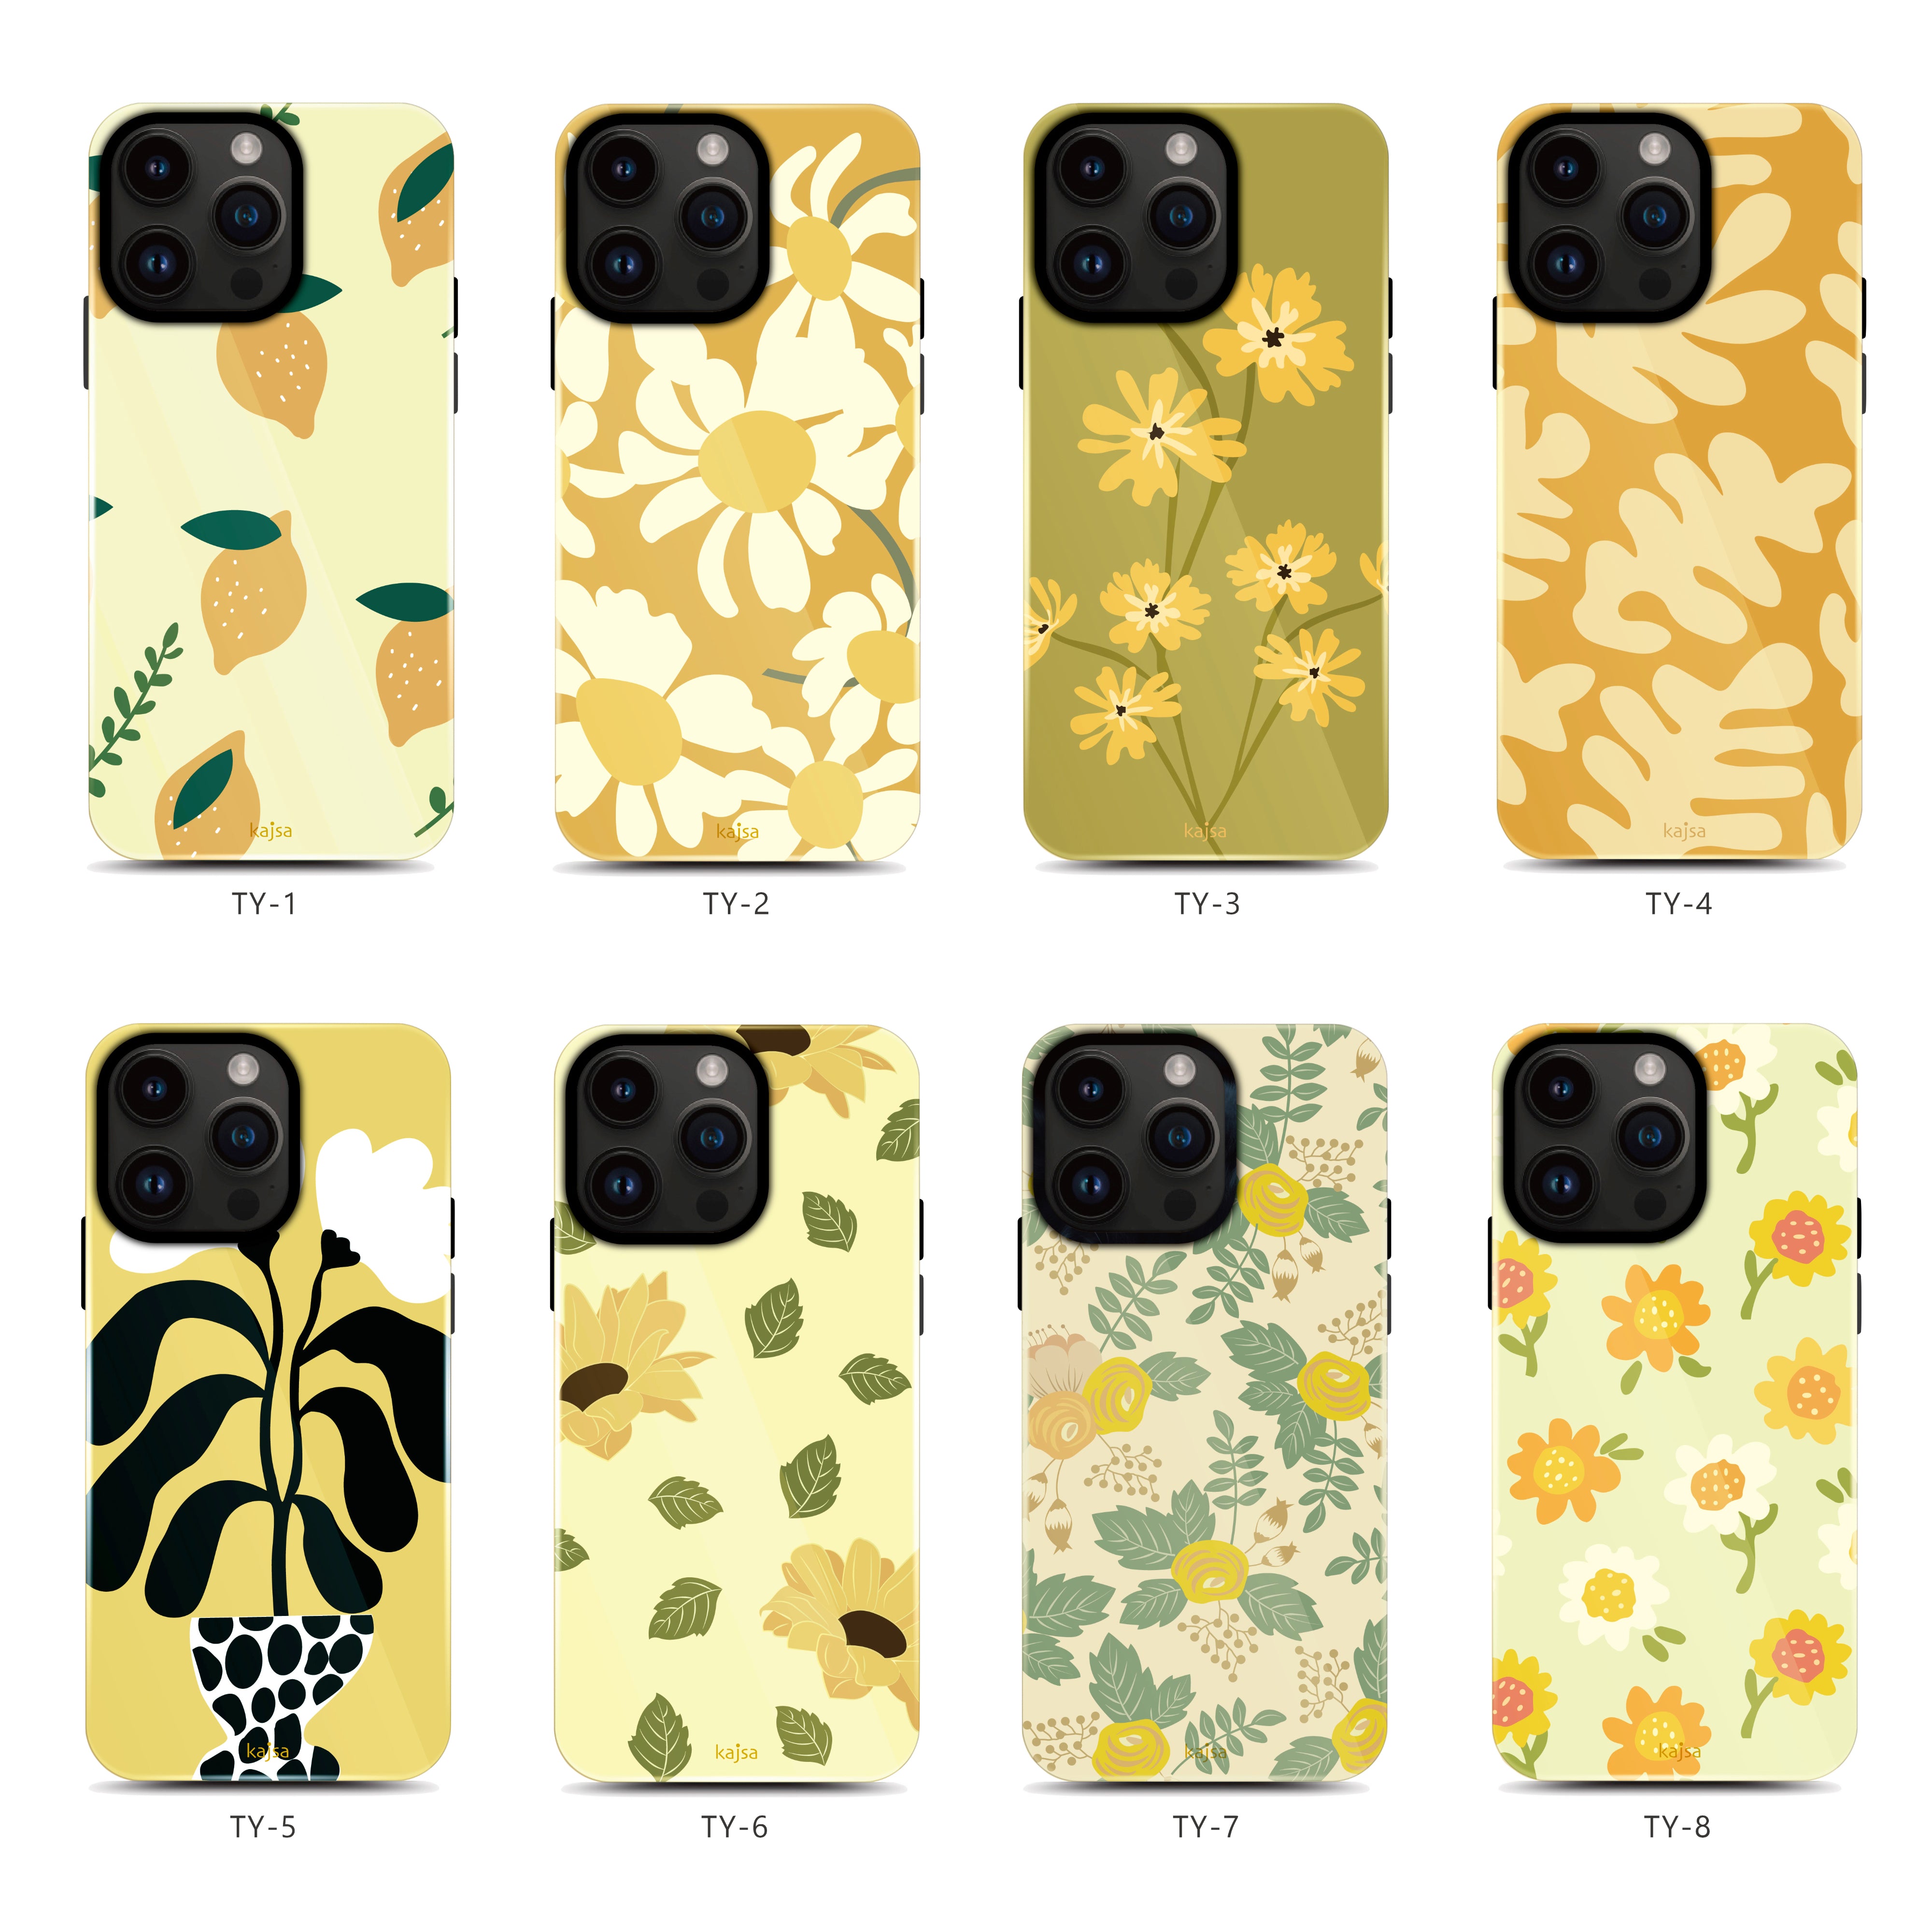 Floral Collection - Tropical Back Base for iPhone 14 (TY1)-Phone Case- phone case - phone cases- phone cover- iphone cover- iphone case- iphone cases- leather case- leather cases- DIYCASE - custom case - leather cover - hand strap case - croco pattern case - snake pattern case - carbon fiber phone case - phone case brand - unique phone case - high quality - phone case brand - protective case - buy phone case hong kong - online buy phone case - iphone‎手機殼 - 客製化手機殼 - samsung ‎手機殼 - 香港手機殼 - 買電話殼